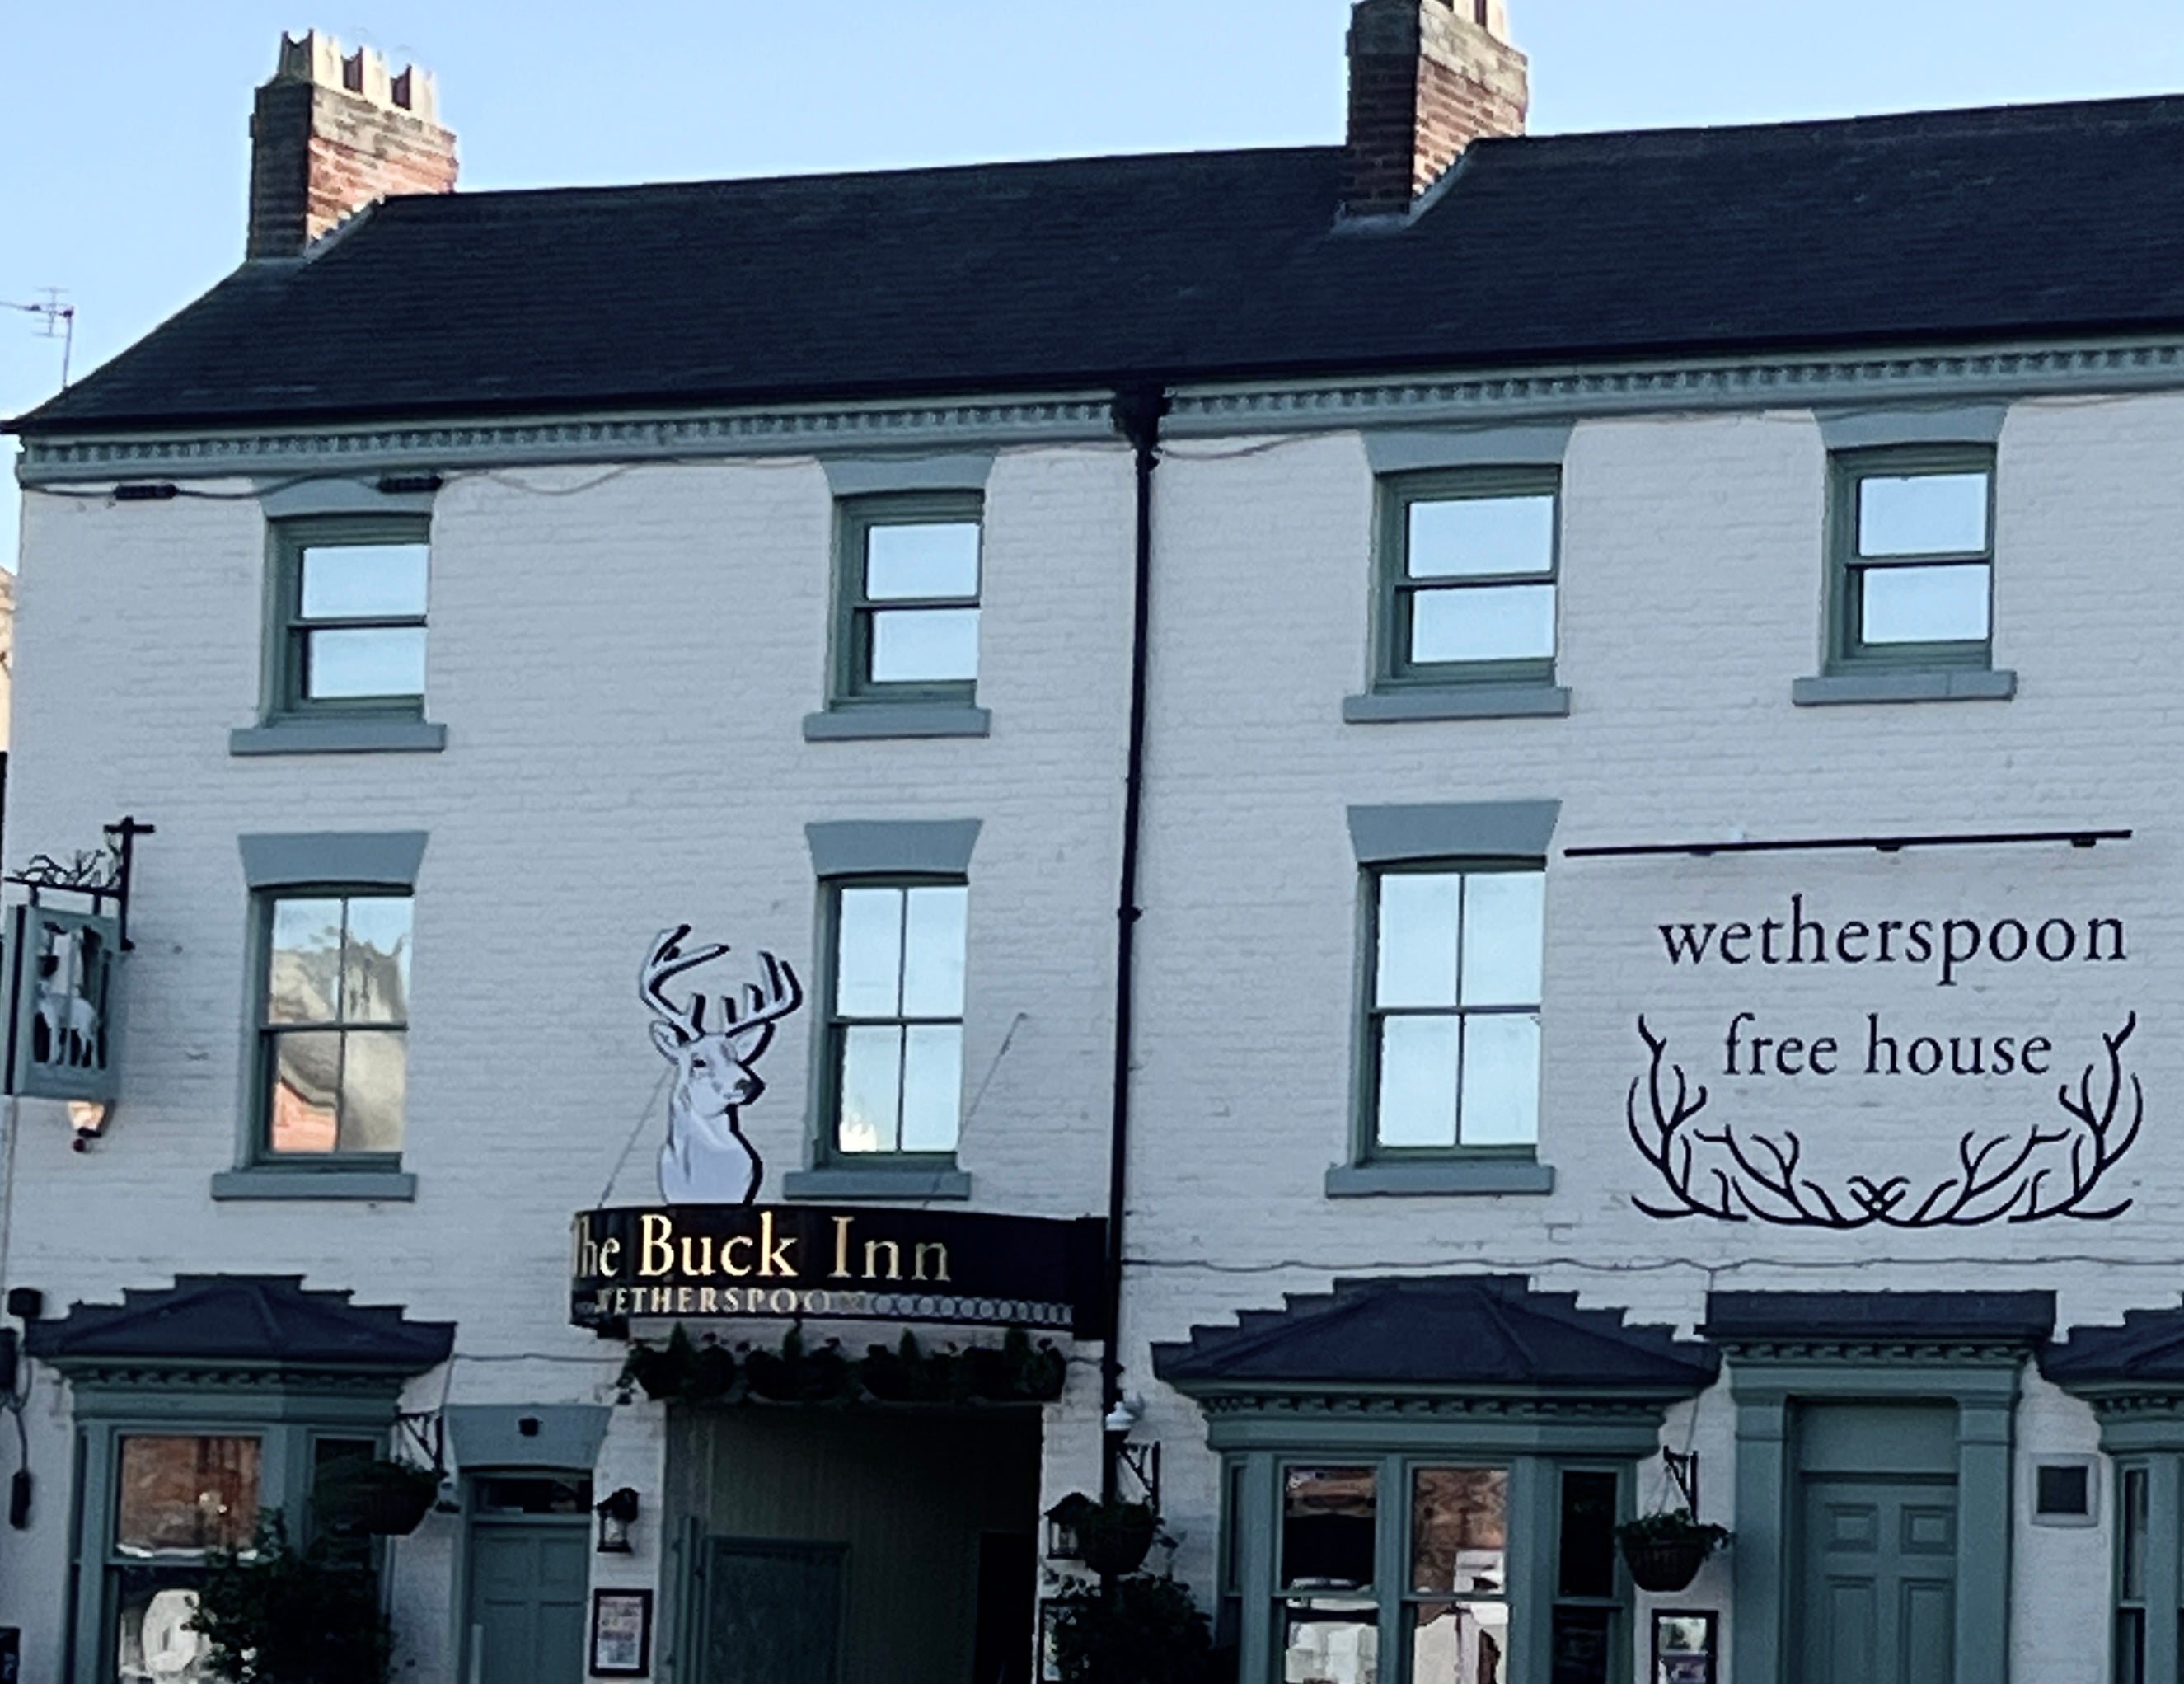 Cheap and cheerful: the Buck Inn, the Wetherspoons pub in Northallerton